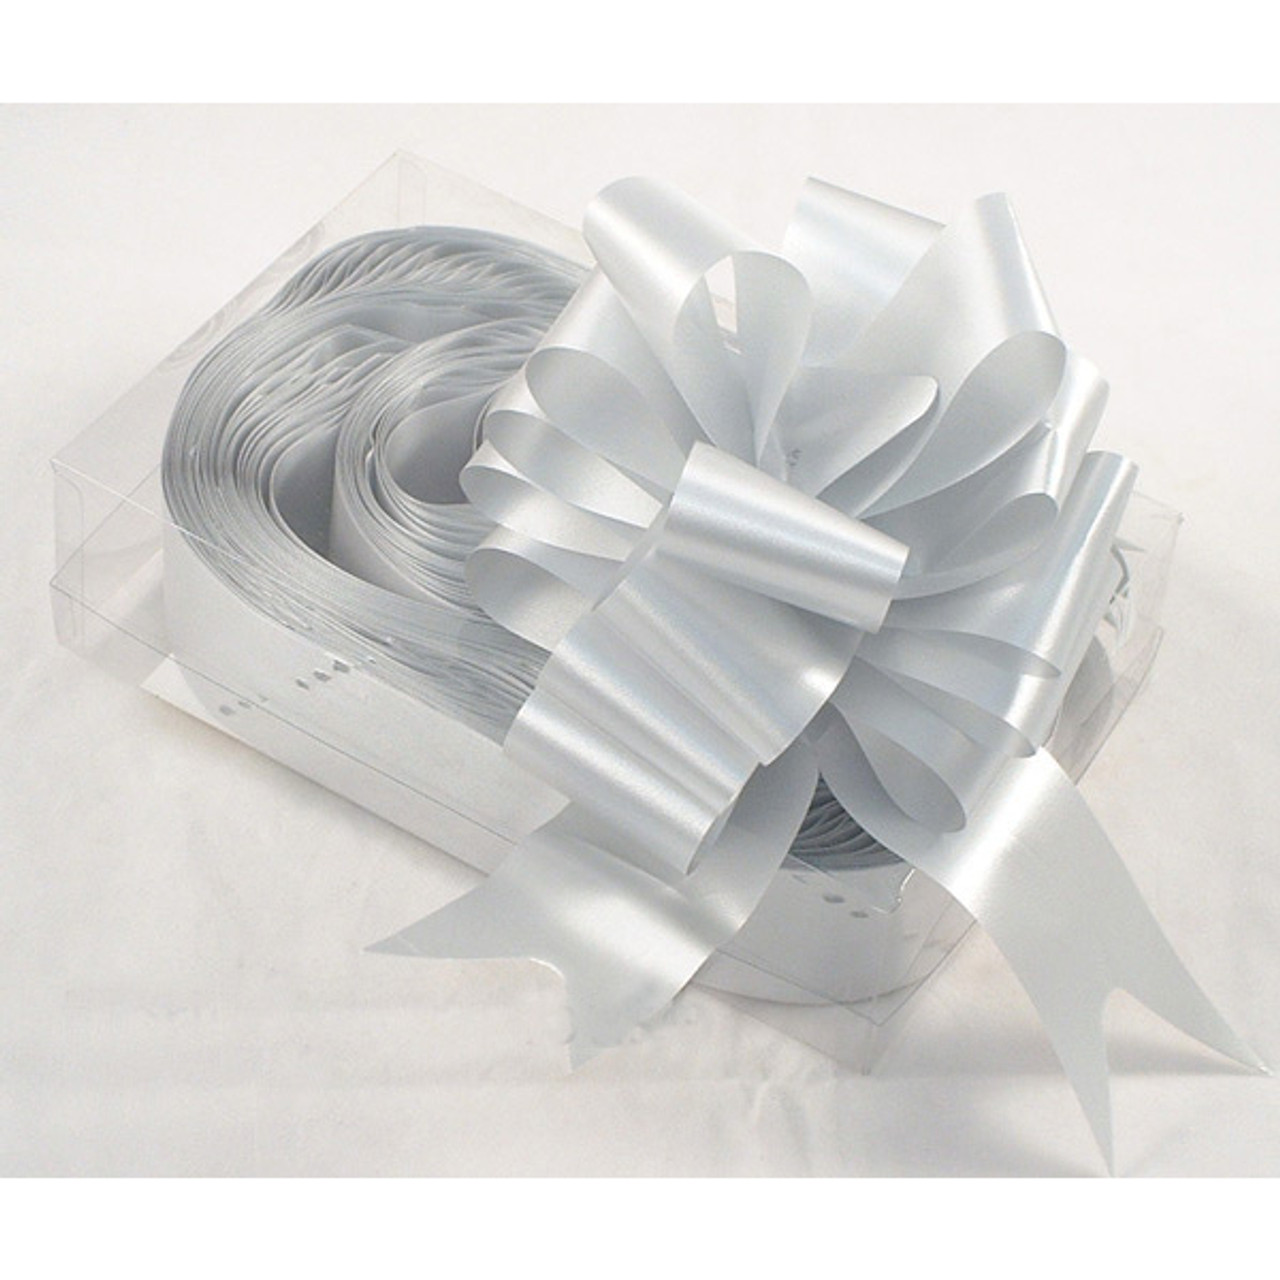 Florists Pull Bows by Oasis 5cm Box of 20 Silver makes 15cm bows 